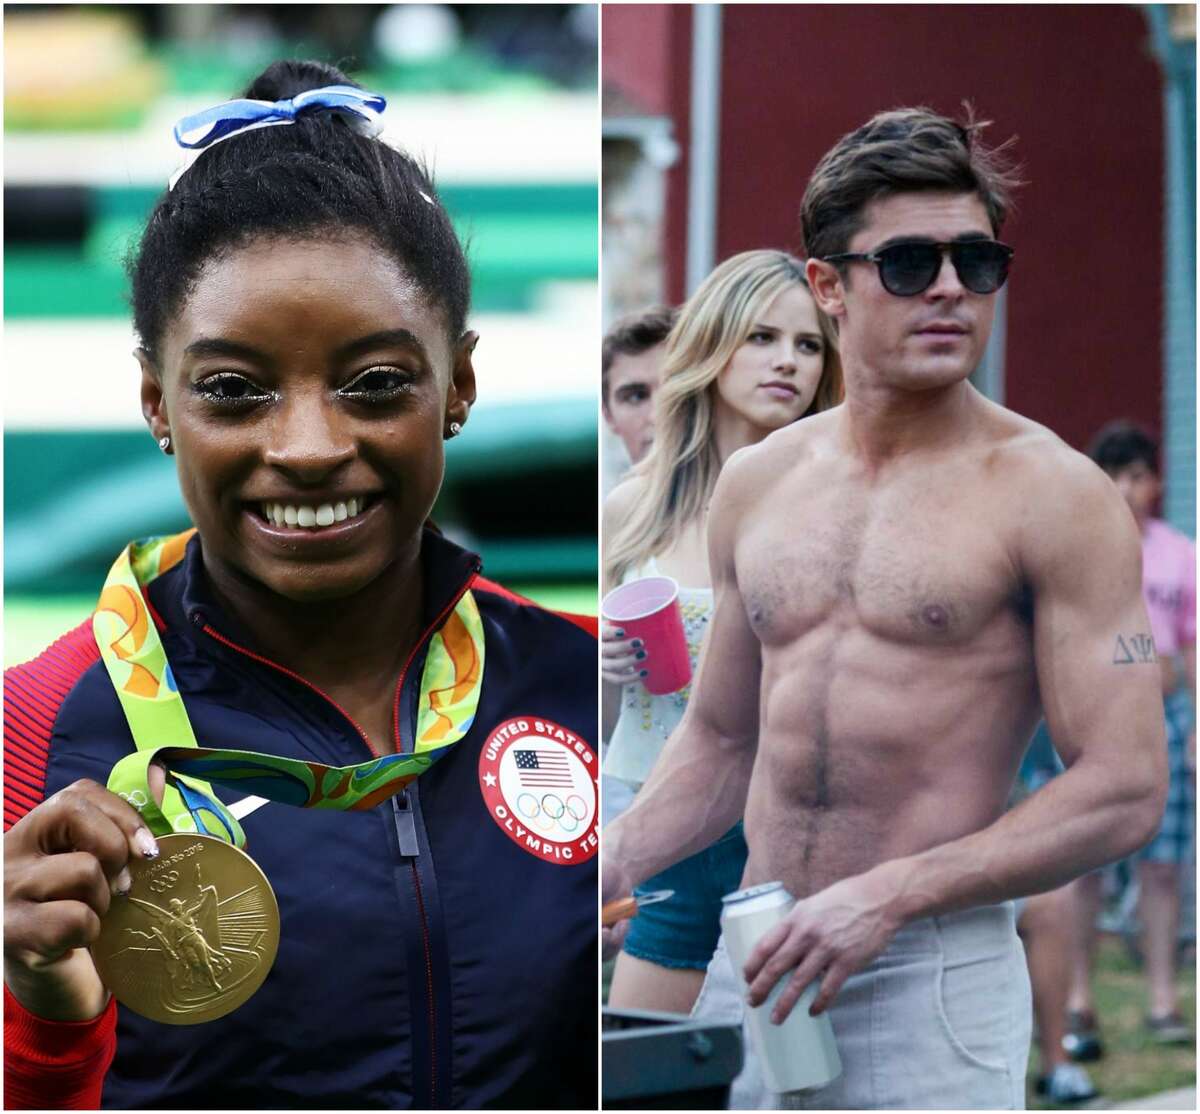 Zac Efron and Simone Biles have some serious flirting going on Twitter, and it's the cutest thing. Apart from her love of Efron, there are plenty of things to learn about the individual all-around gold medalist. Take a look through the gallery see the tweets and keep going for facts about Simone Biles.